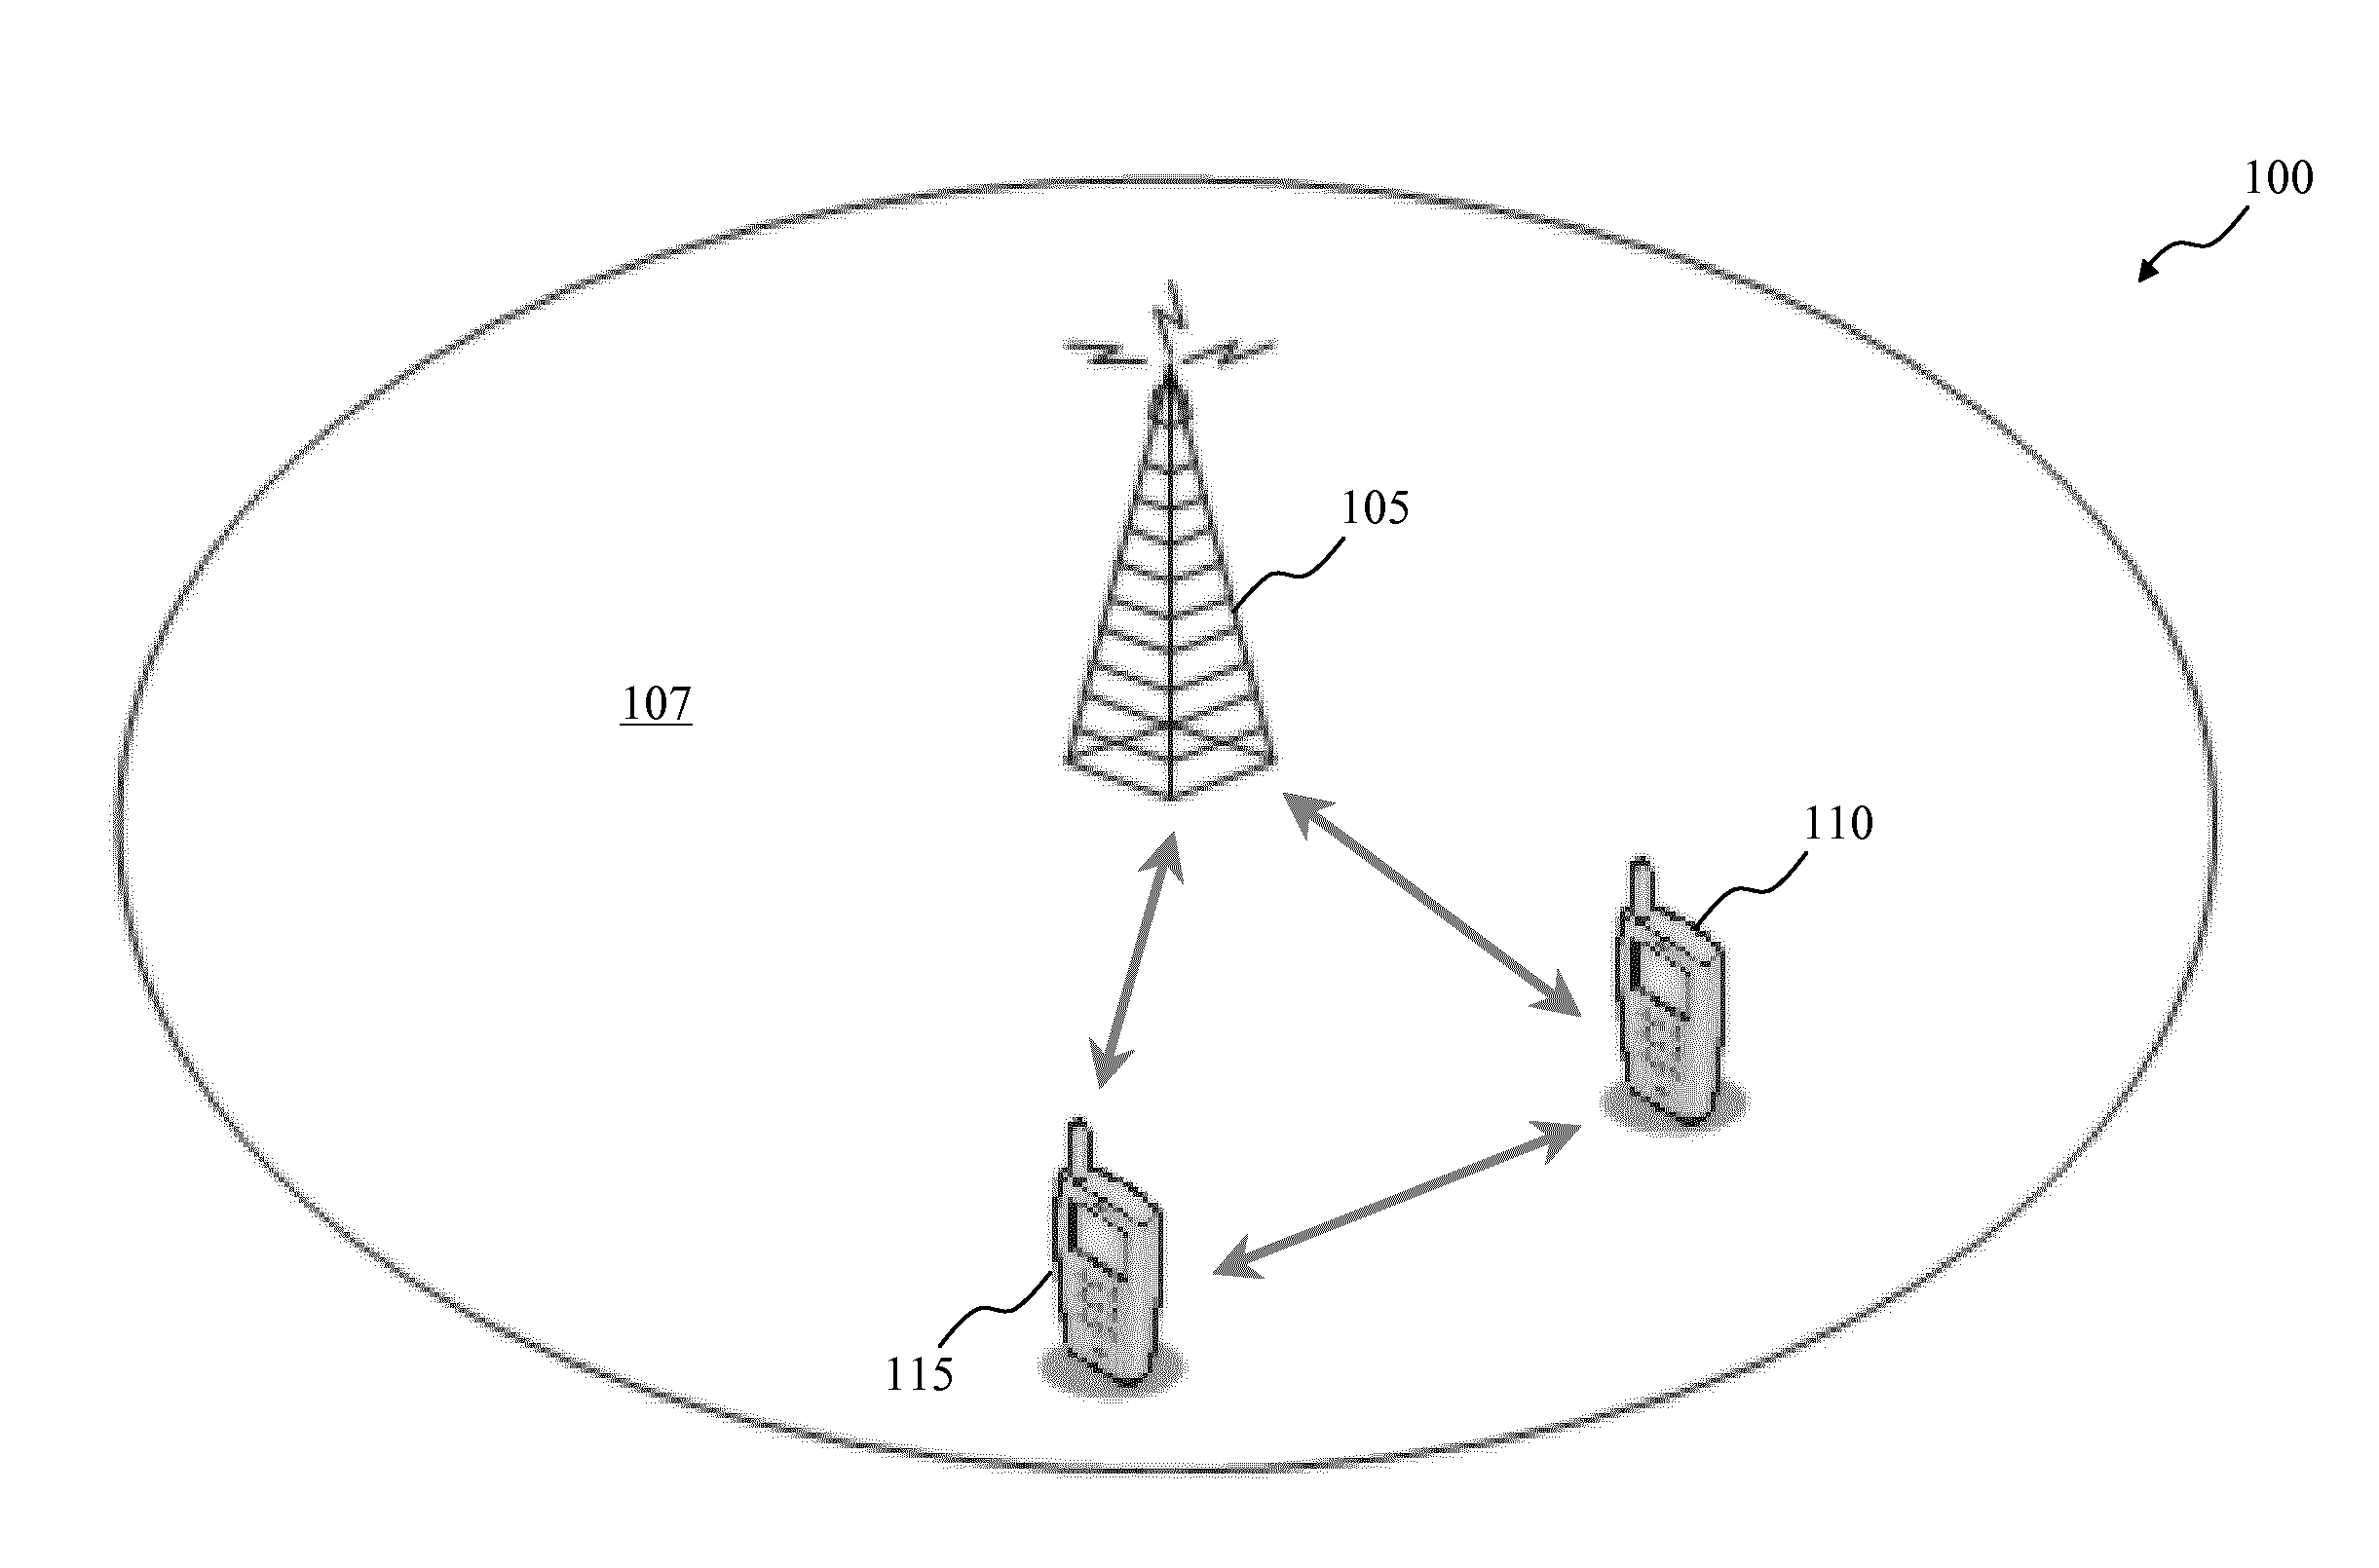 Device-to-device communication management in mobile communication networks